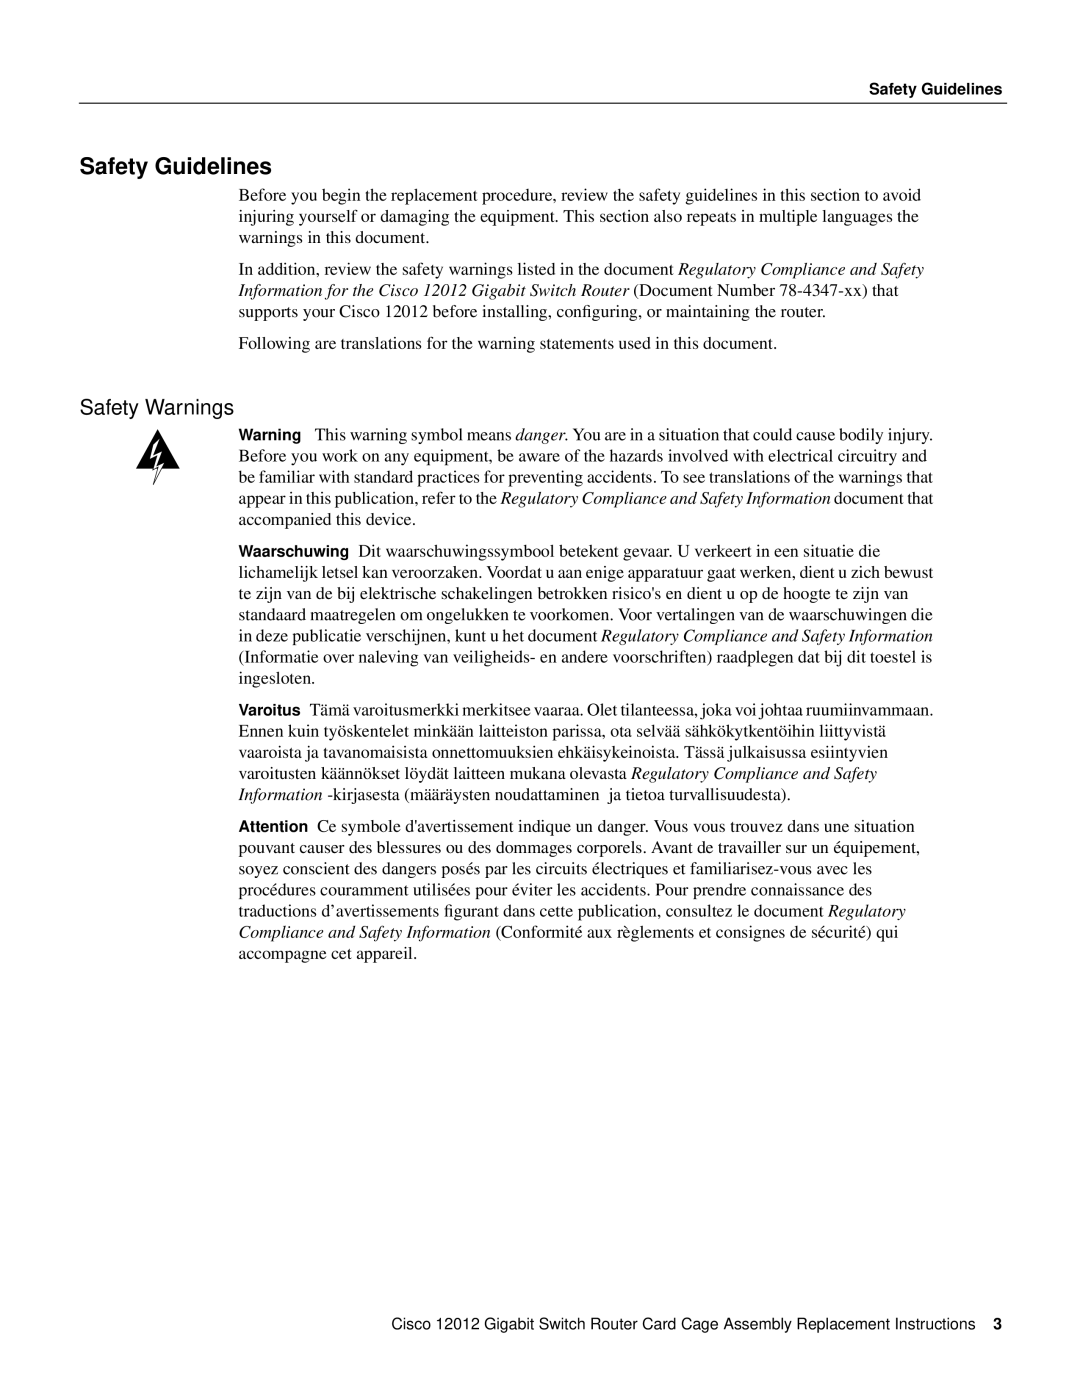 Cisco Systems 12012 manual Safety Guidelines, Safety Warnings 